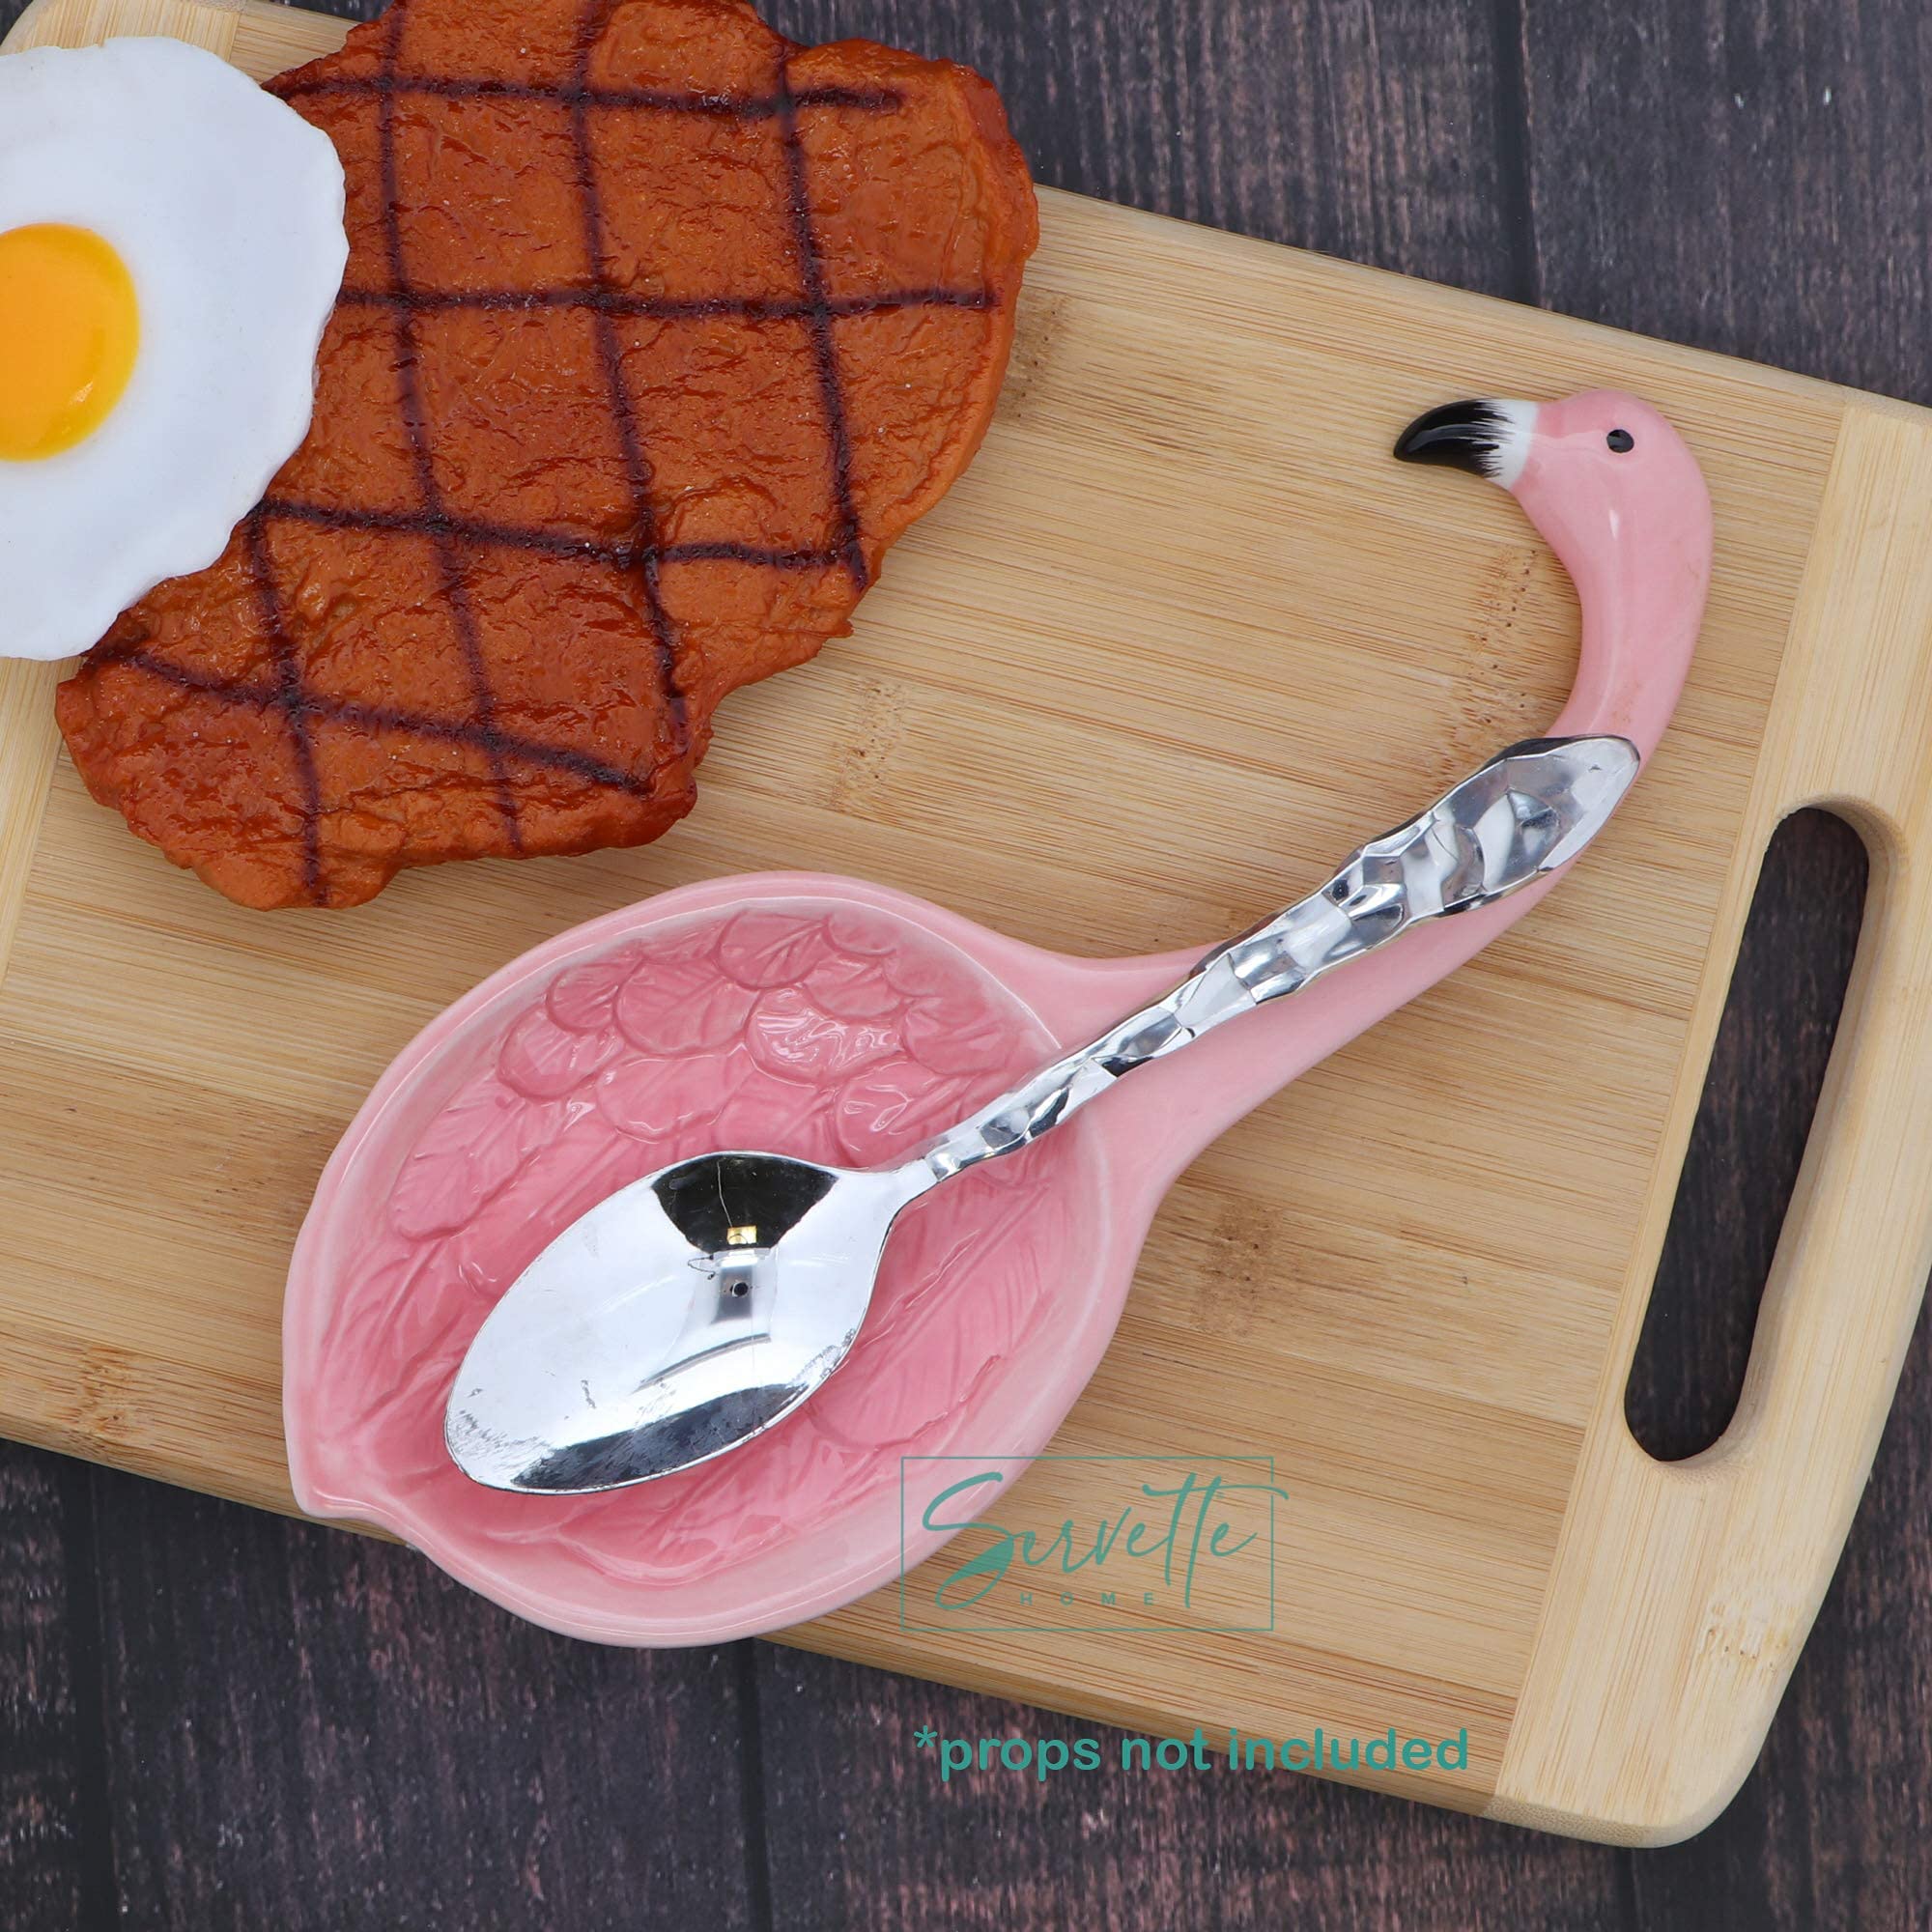 Animal-themed Ceramic Spoon Rest Kitchen Ladle and Spoon Holder - Flamingo